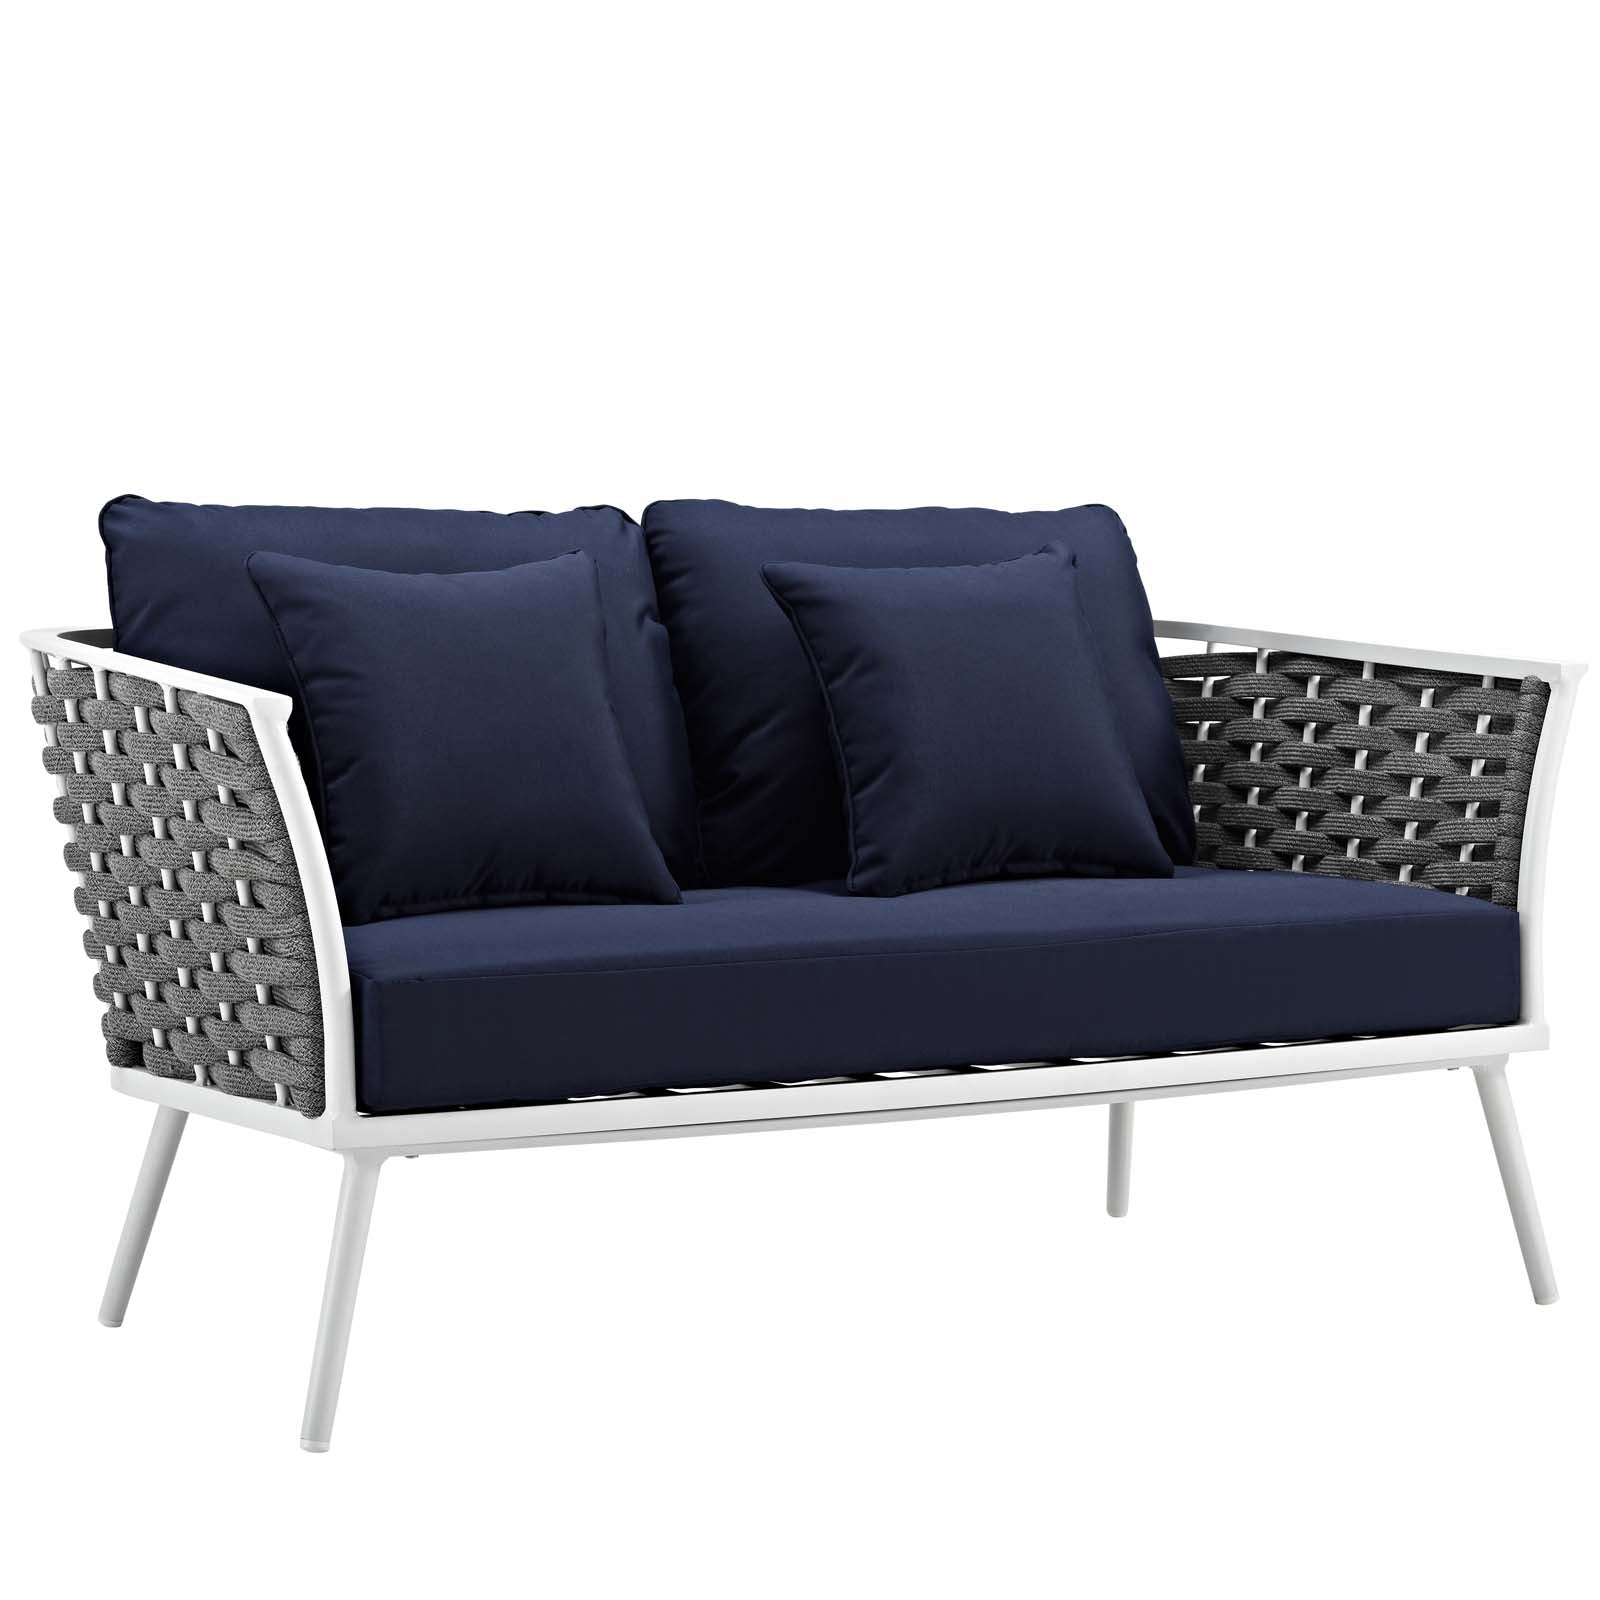 Stance 7 Piece Outdoor Patio Aluminum Sectional Sofa Set-Outdoor Set-Modway-Wall2Wall Furnishings